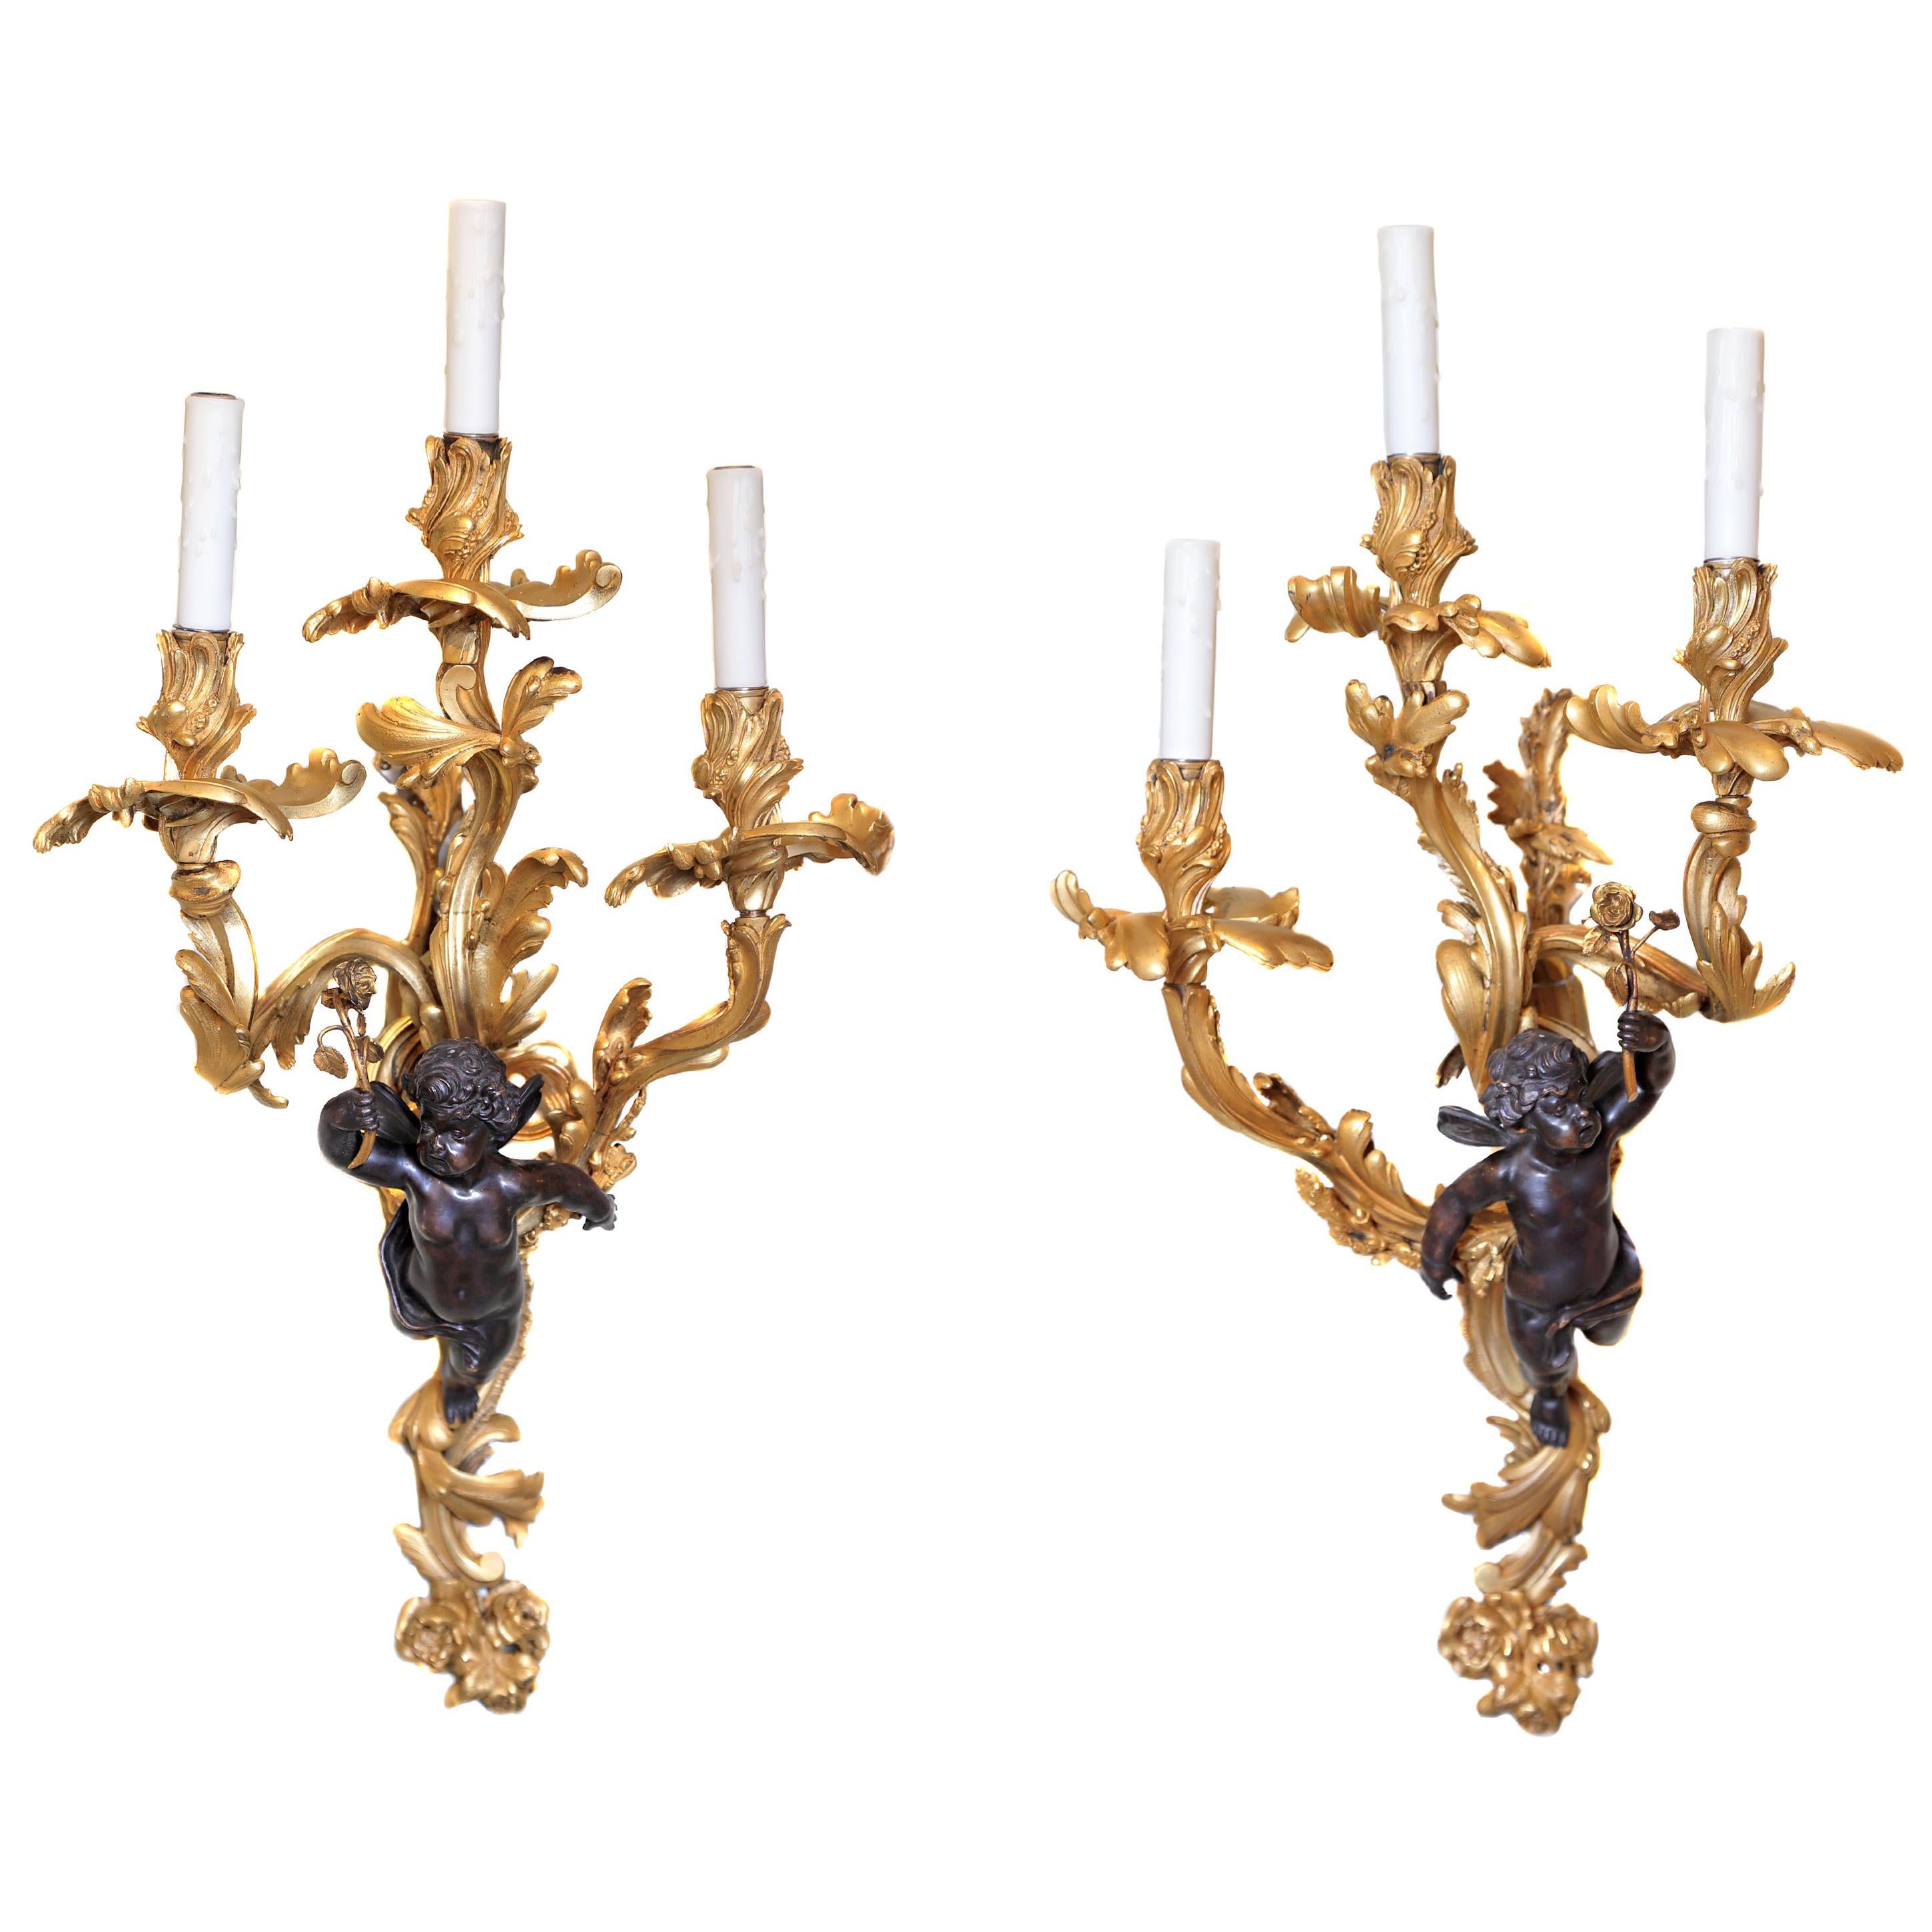 19th Century Pair of Large French Gilt Bronze and Patinated Cherub Sconces